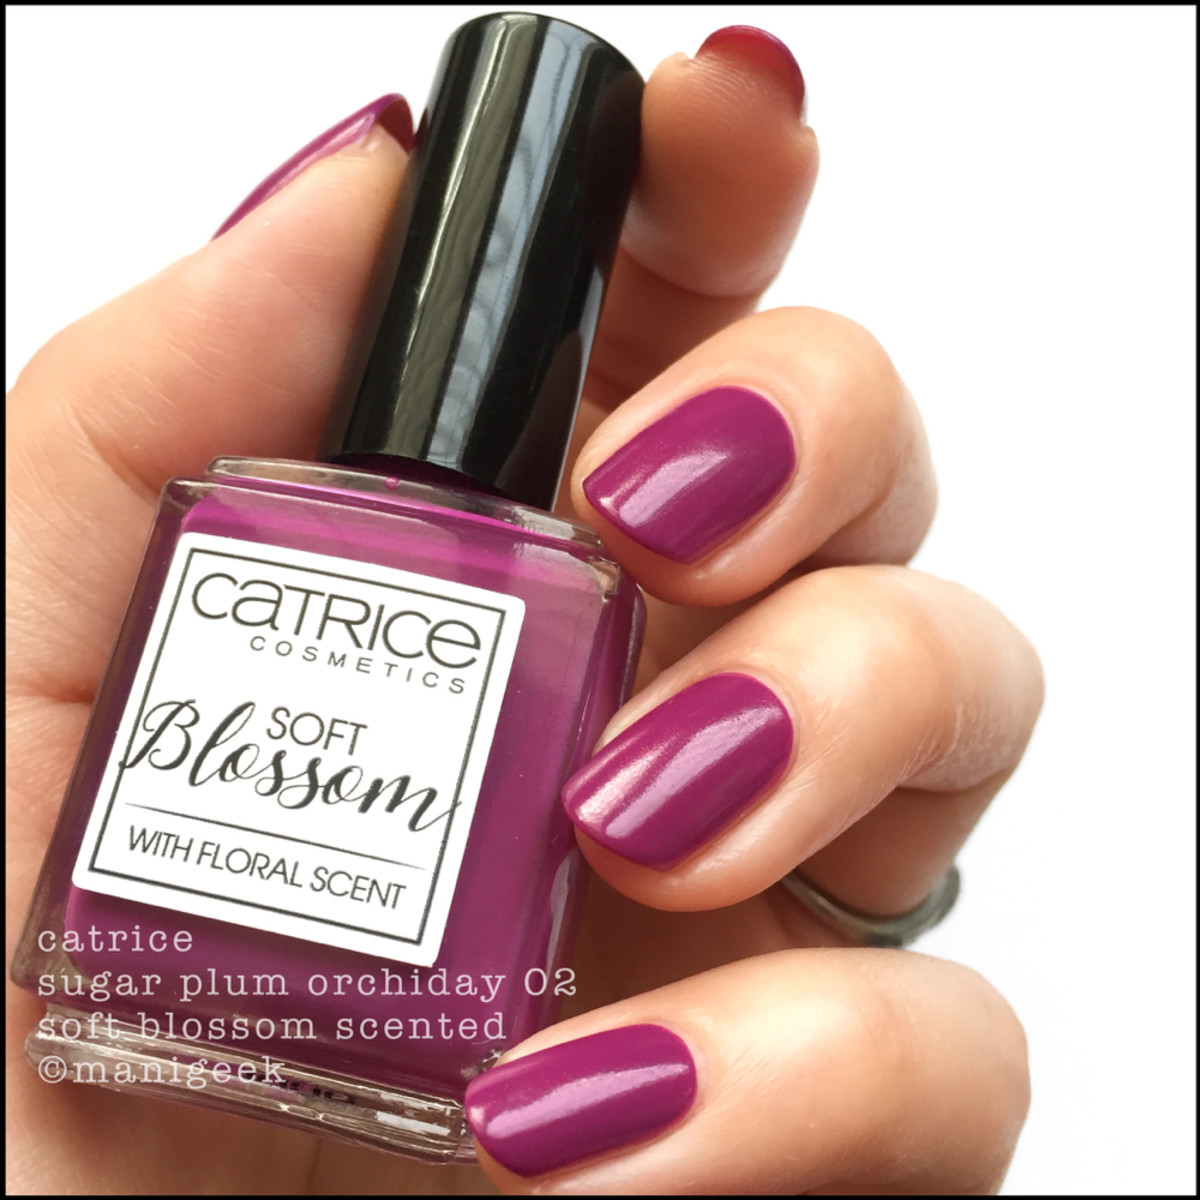 Catrice Sugar Plum Orchidy _ Catrice Soft Blossom Scented Nail Polish Swatches